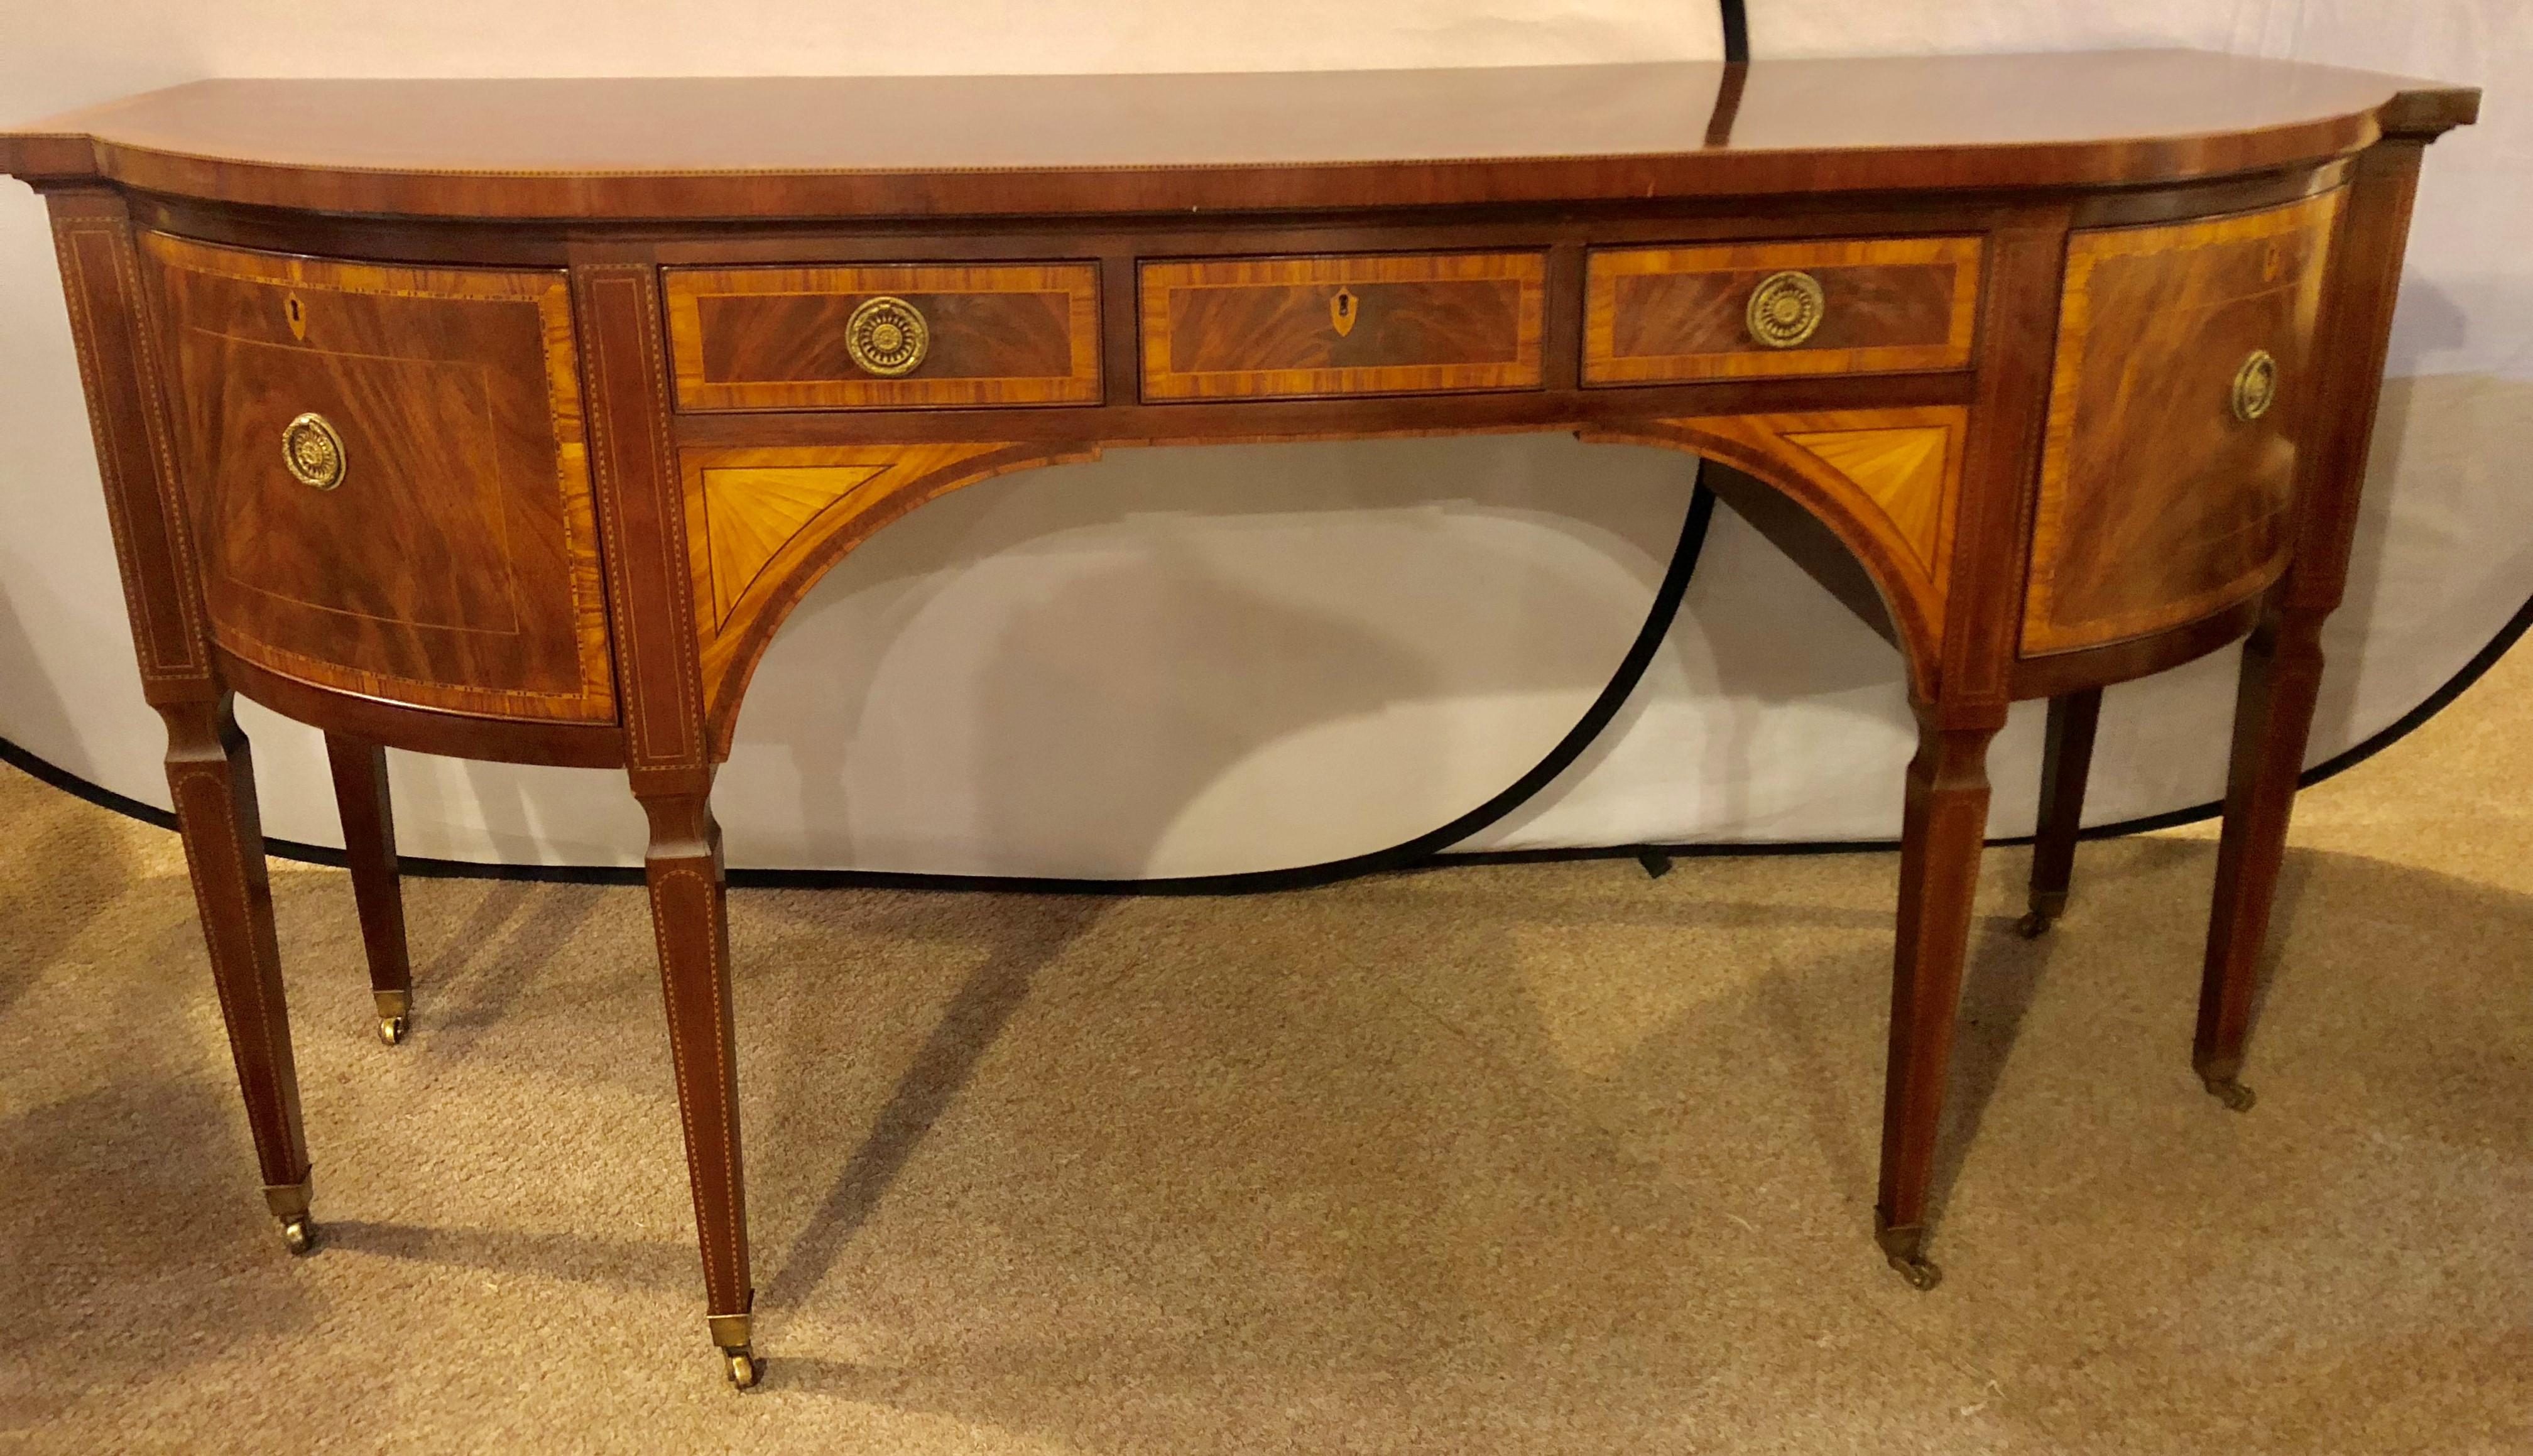 A Baker Fine Furniture Company Stately Homes Sheraton style mahogany and satinwood inlaid sideboard. The bronze casters leading to tapering legs of solid mahogany supporting an upper shell of two satinwood banded crotch mahogany doors flanking a